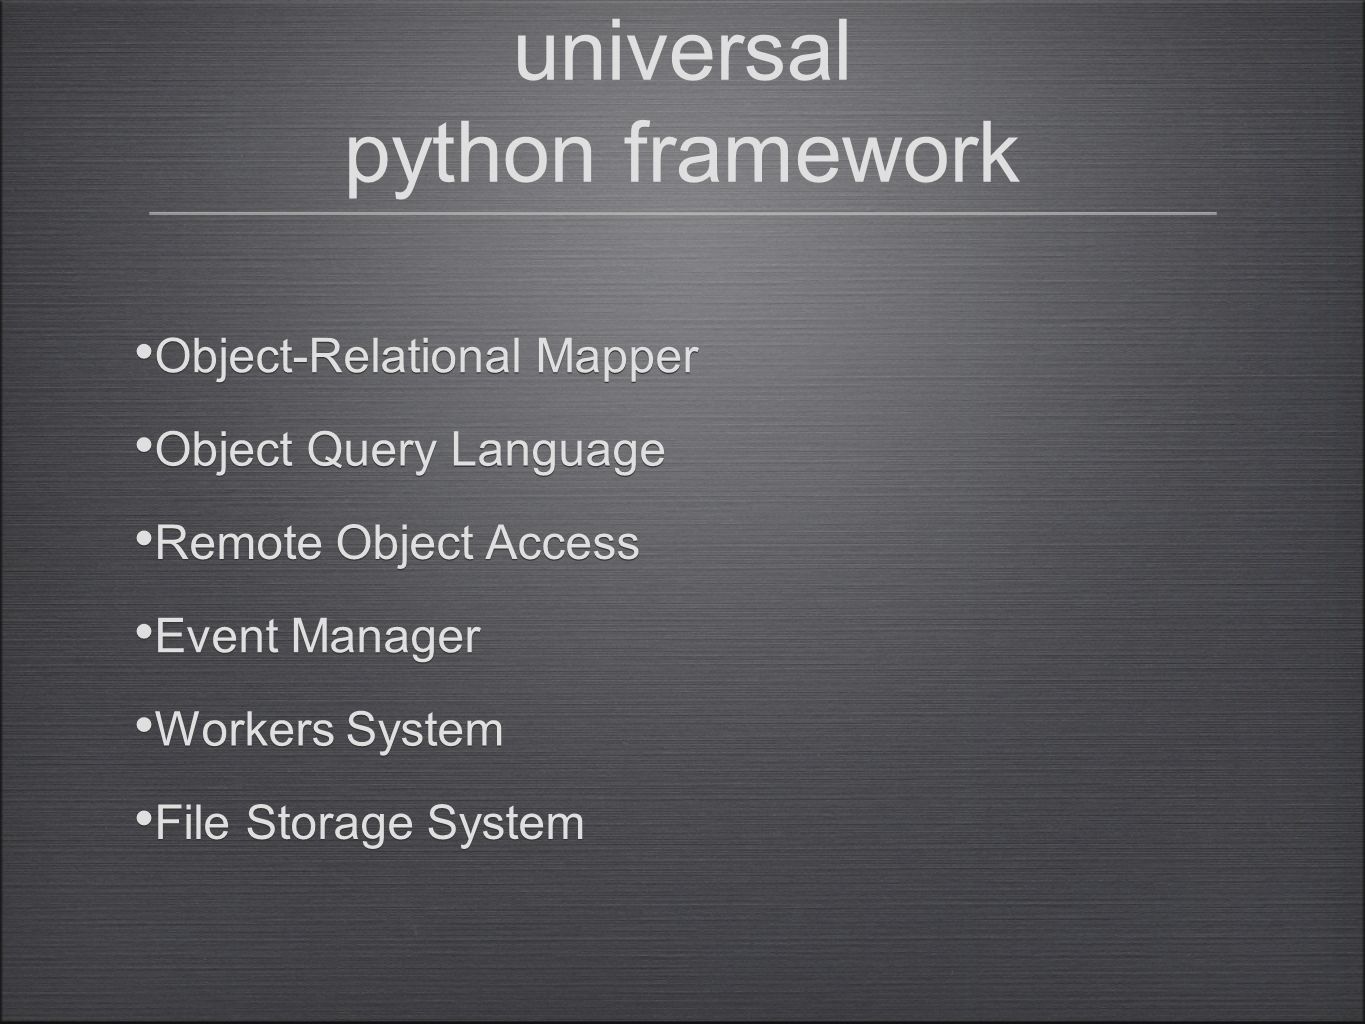 universal python framework Object-Relational Mapper Object Query Language Remote Object Access Event Manager Workers System File Storage System